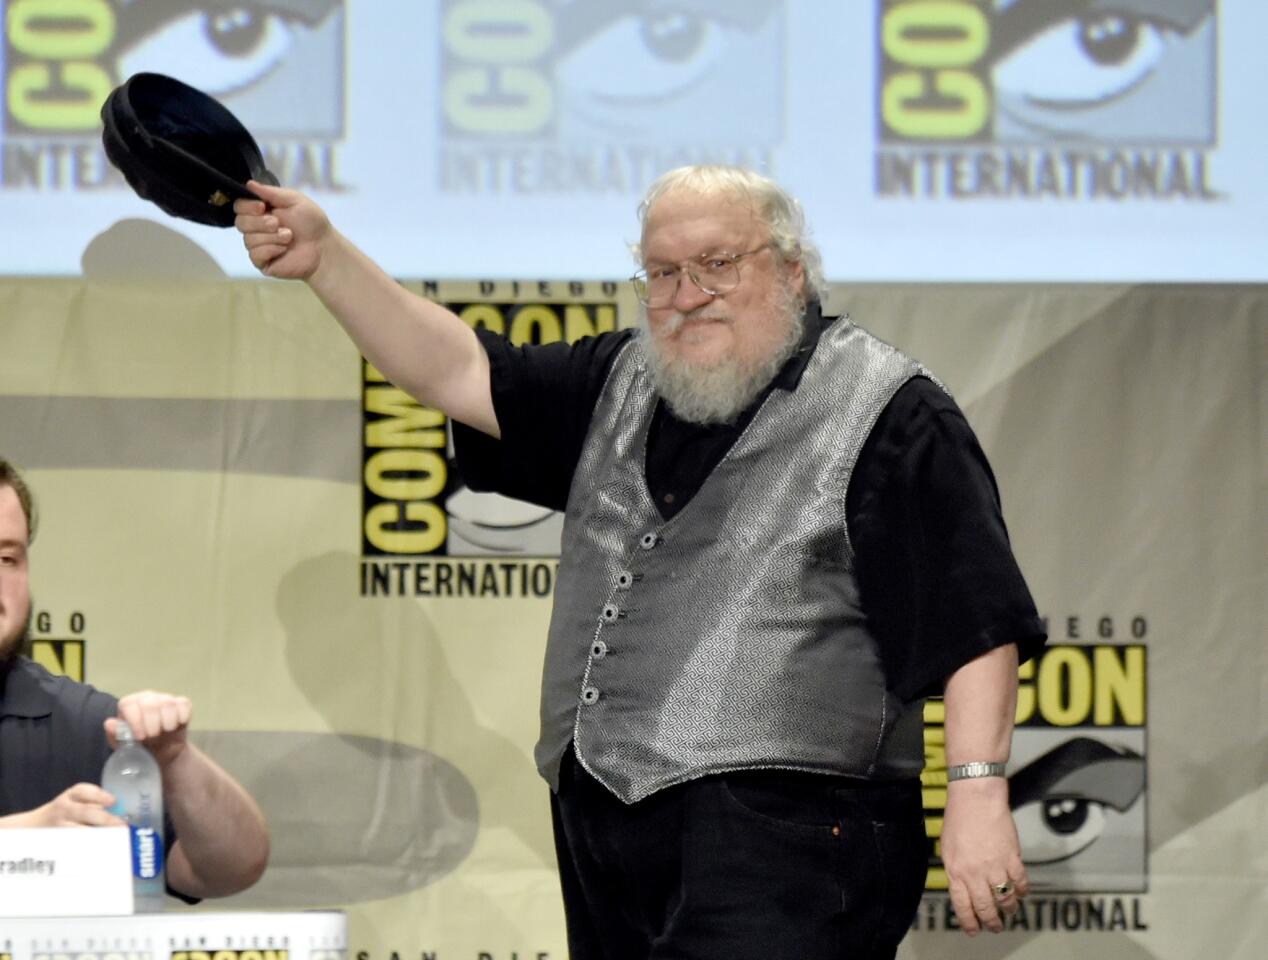 HBO's 'Game Of Thrones' writer George R.R. Martin